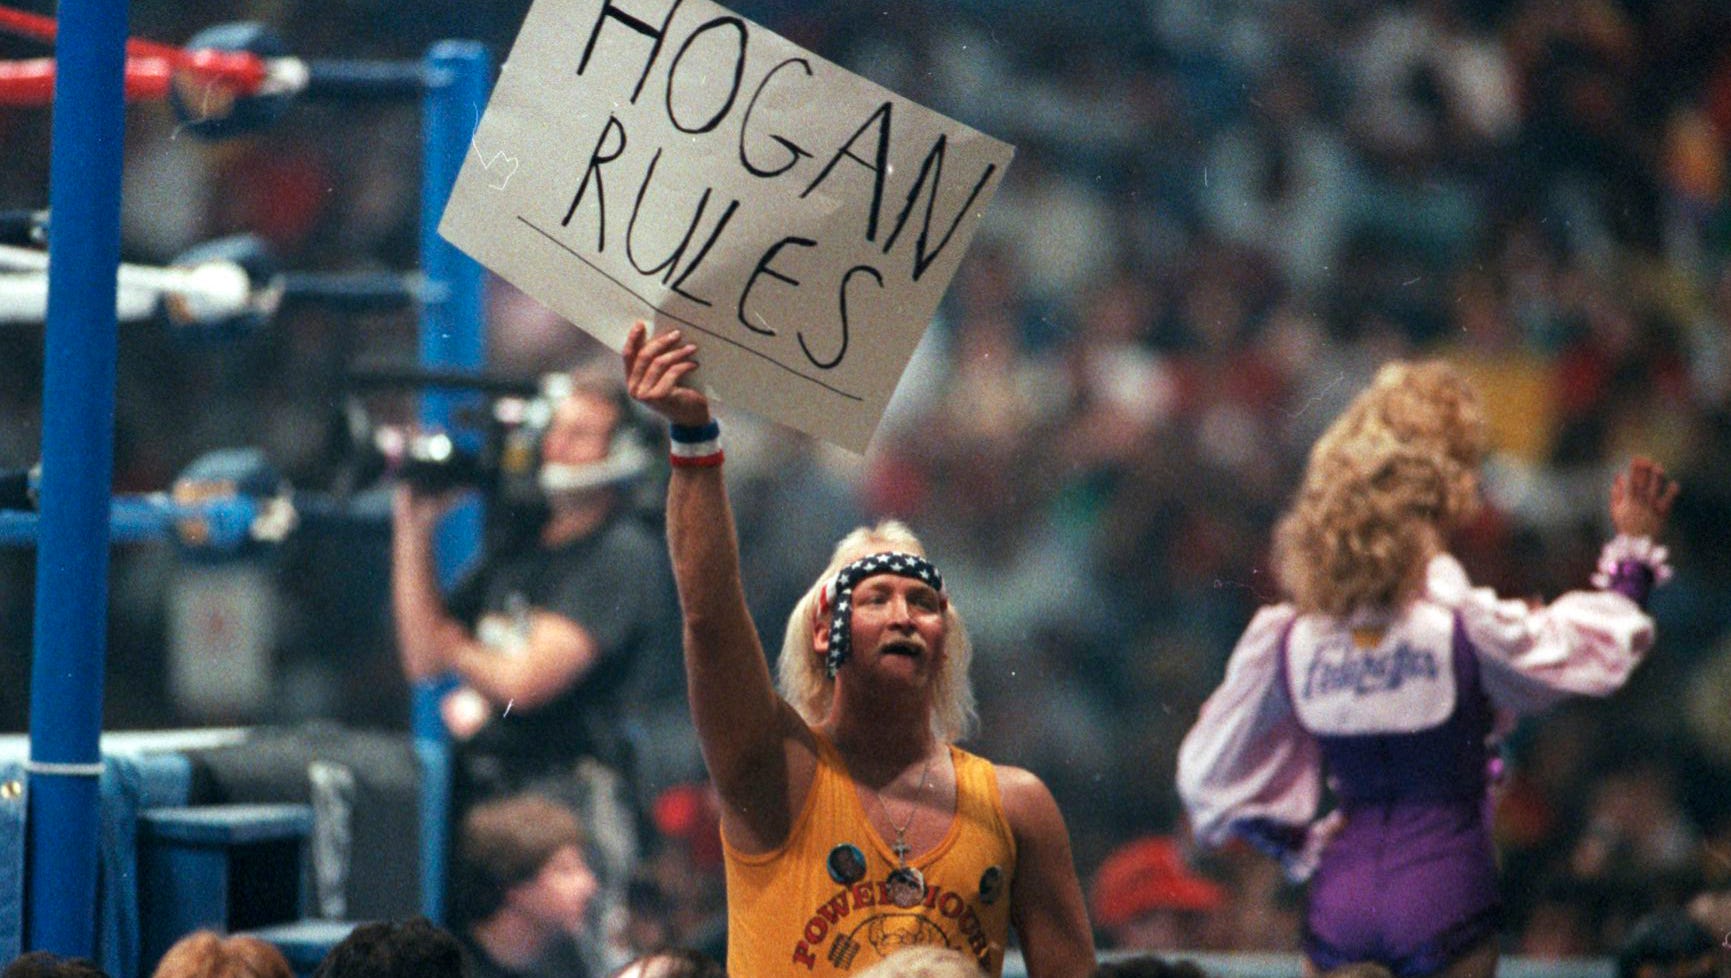 Hulk Hogan definitely was the main attraction at WrestleMania III, which was a reported $1-million payday for the Hulkster.